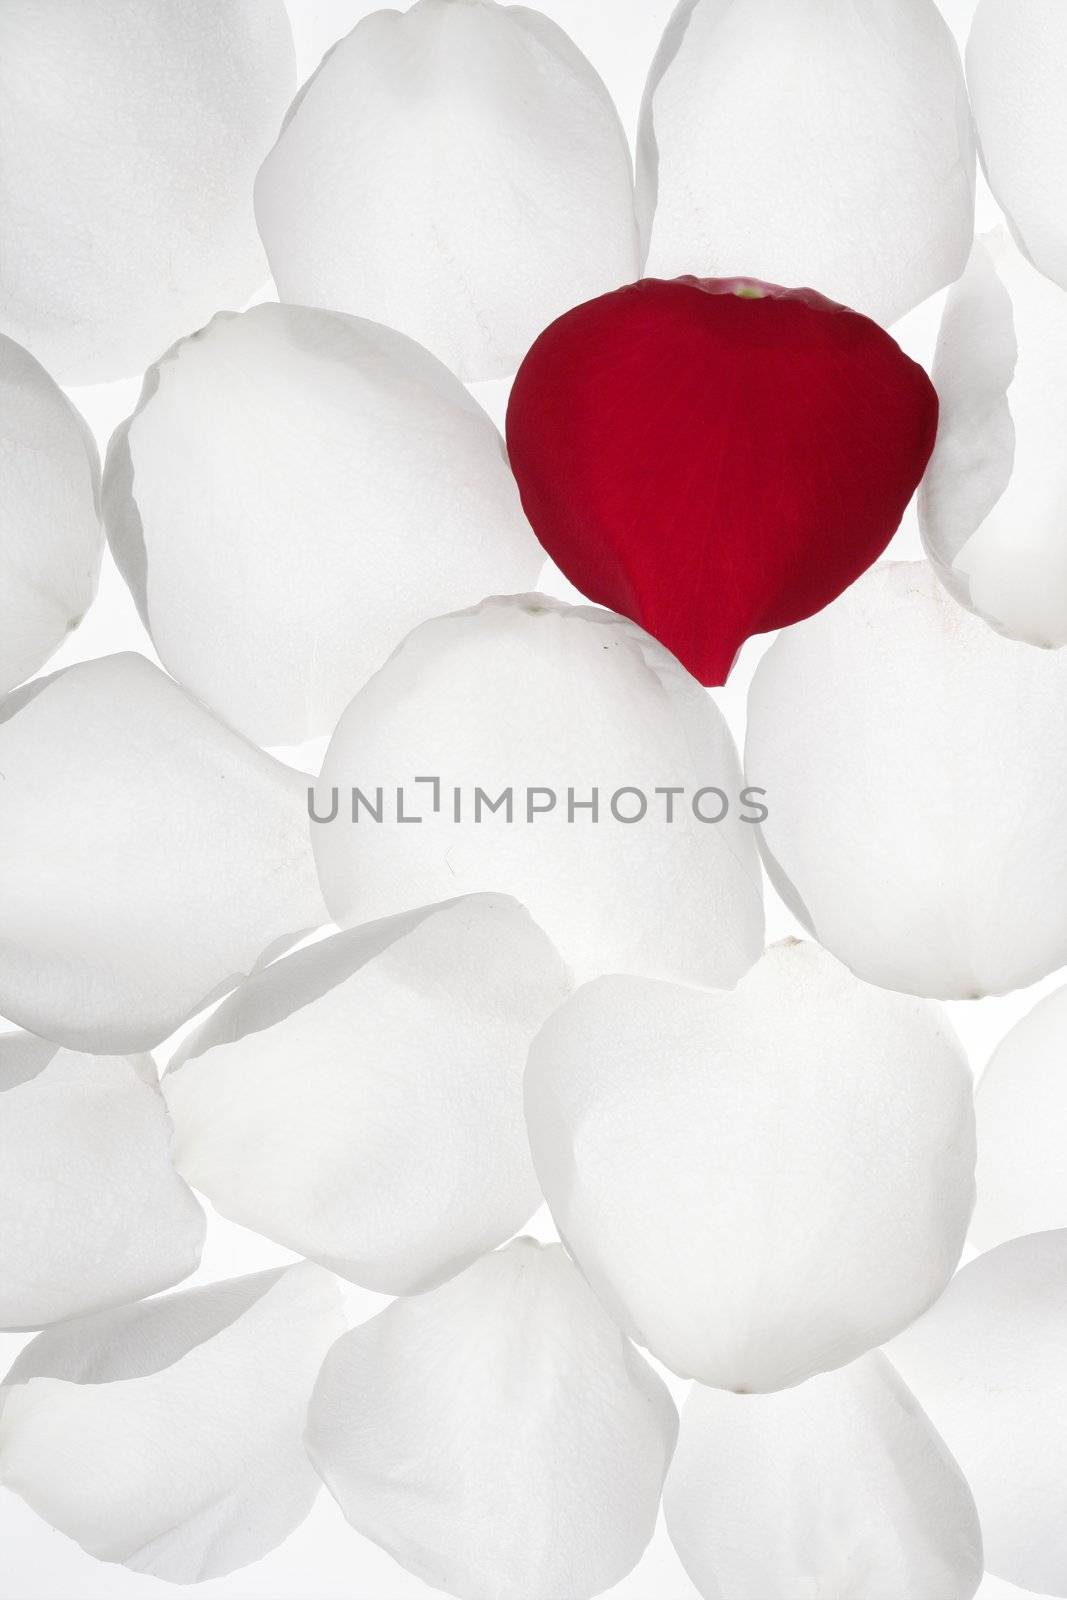 Unique, alone red rose petal between white pattern tranparent wallpaper